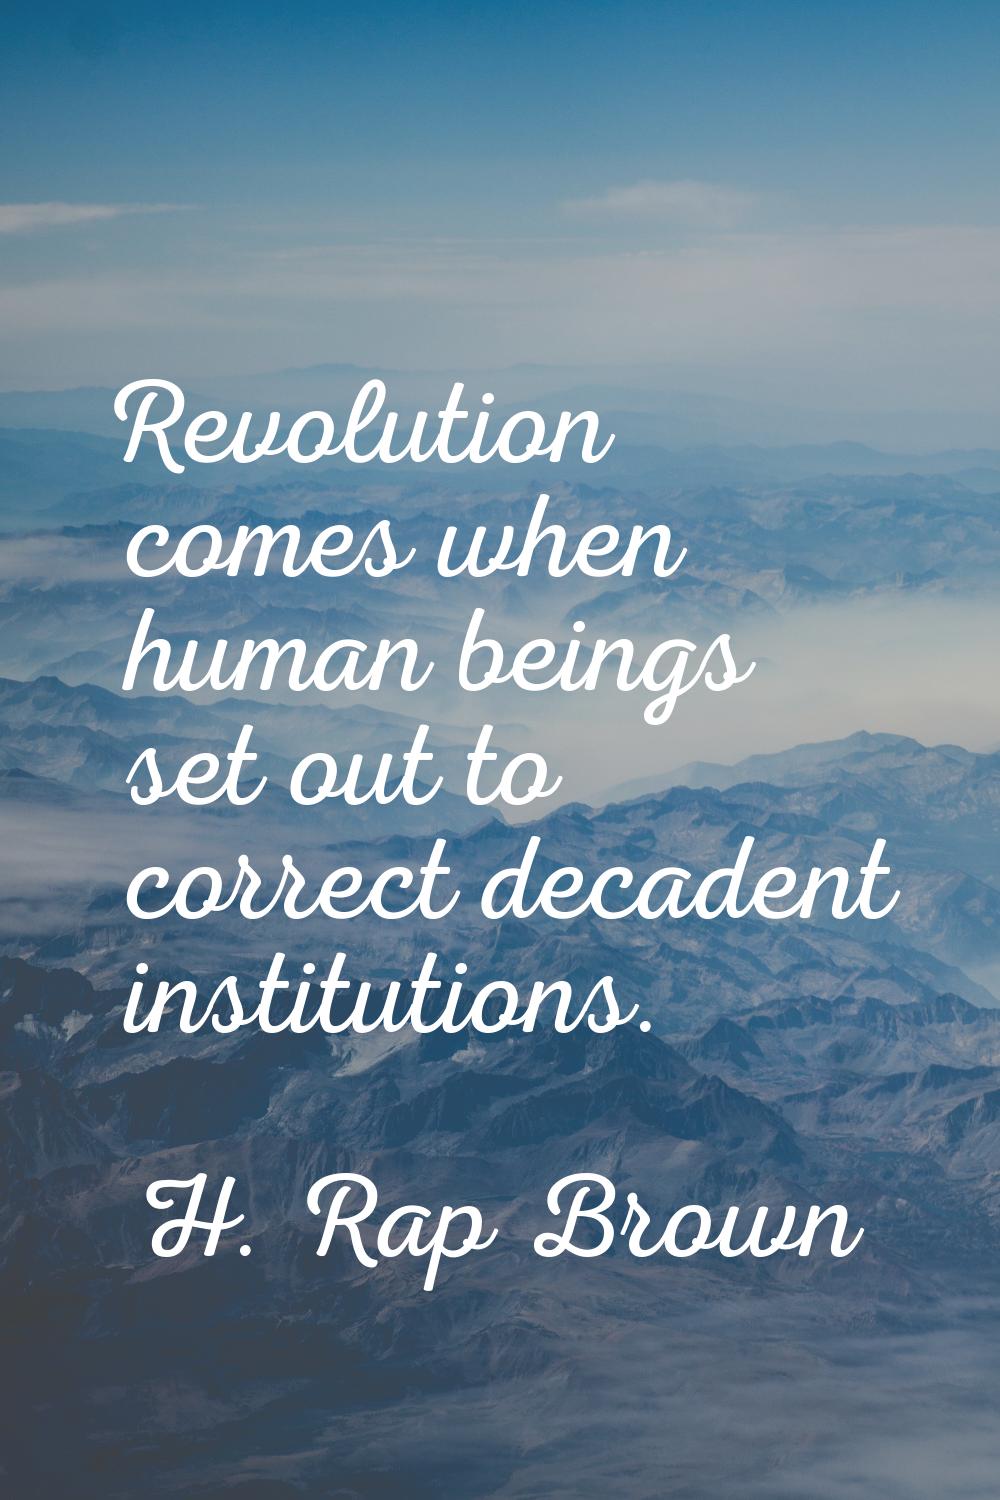 Revolution comes when human beings set out to correct decadent institutions.